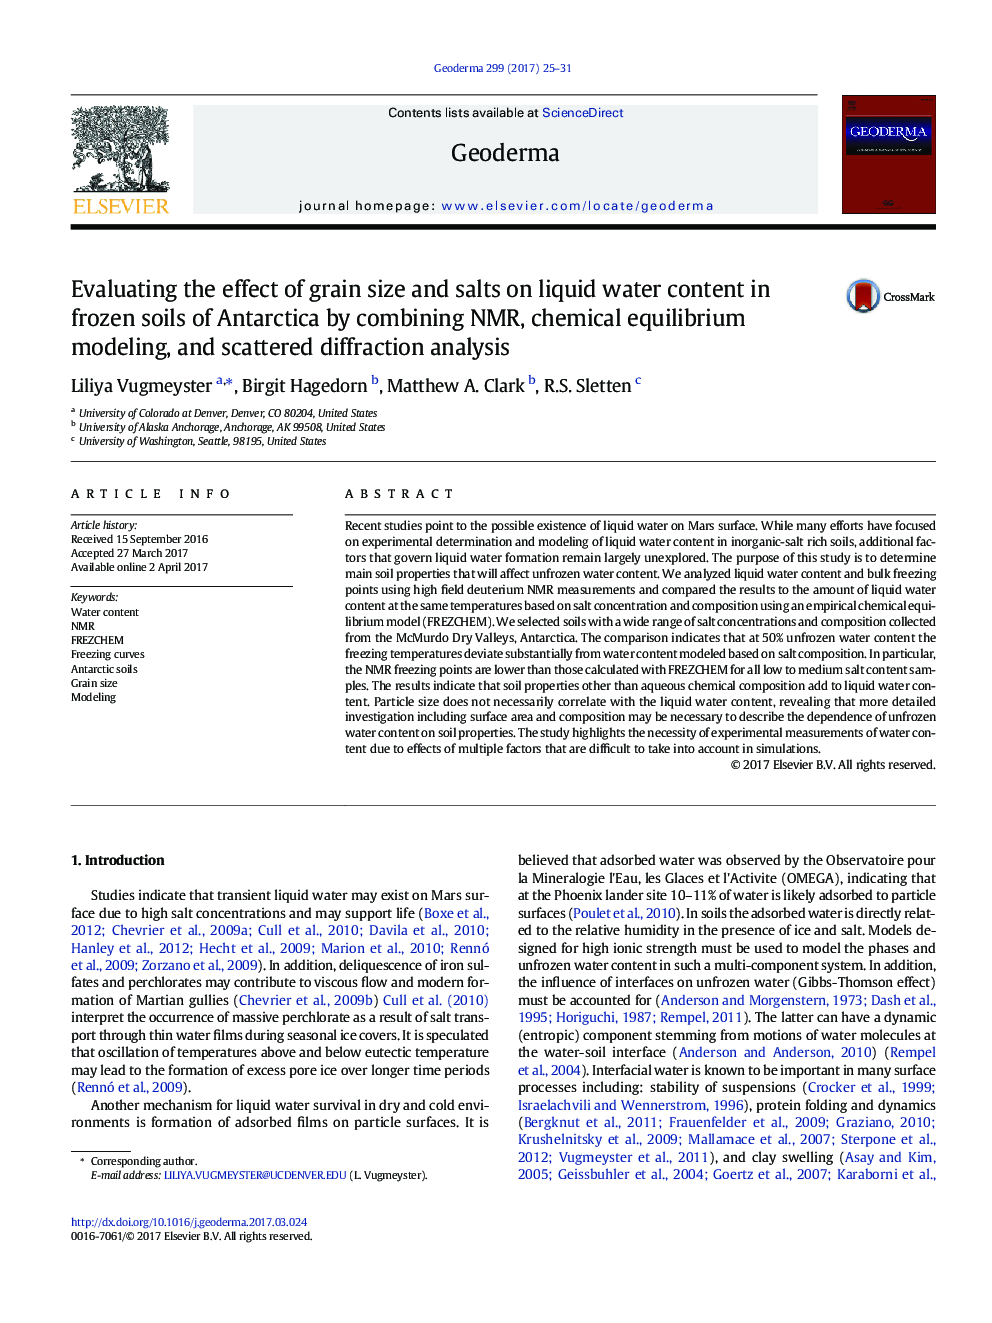 Evaluating the effect of grain size and salts on liquid water content in frozen soils of Antarctica by combining NMR, chemical equilibrium modeling, and scattered diffraction analysis